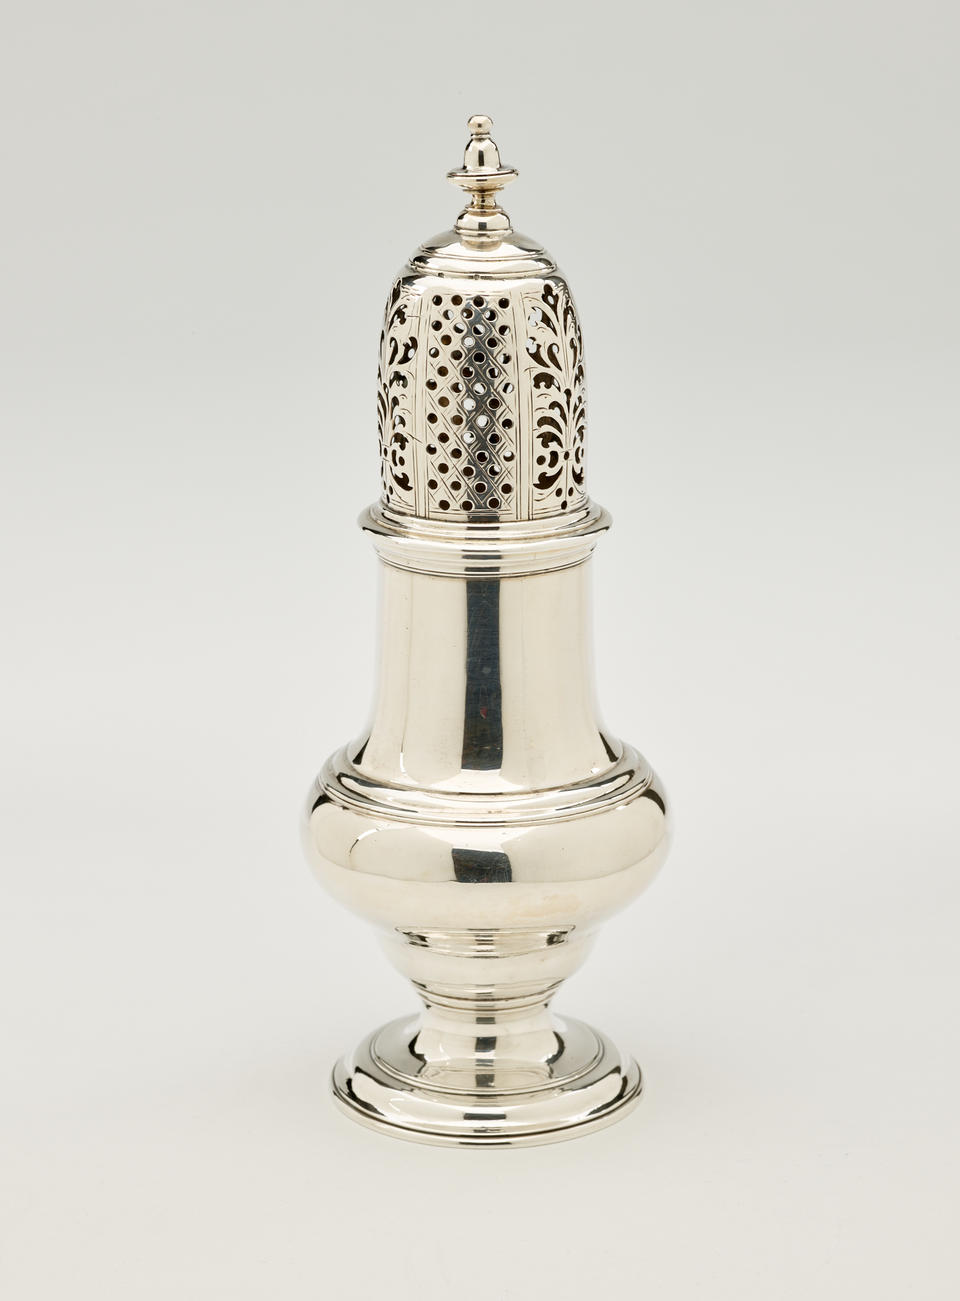 A silver muffineer with a foot, rounded body that goes to a cylindrical top half, and the lid is perforated with small holes and floral cutouts. 